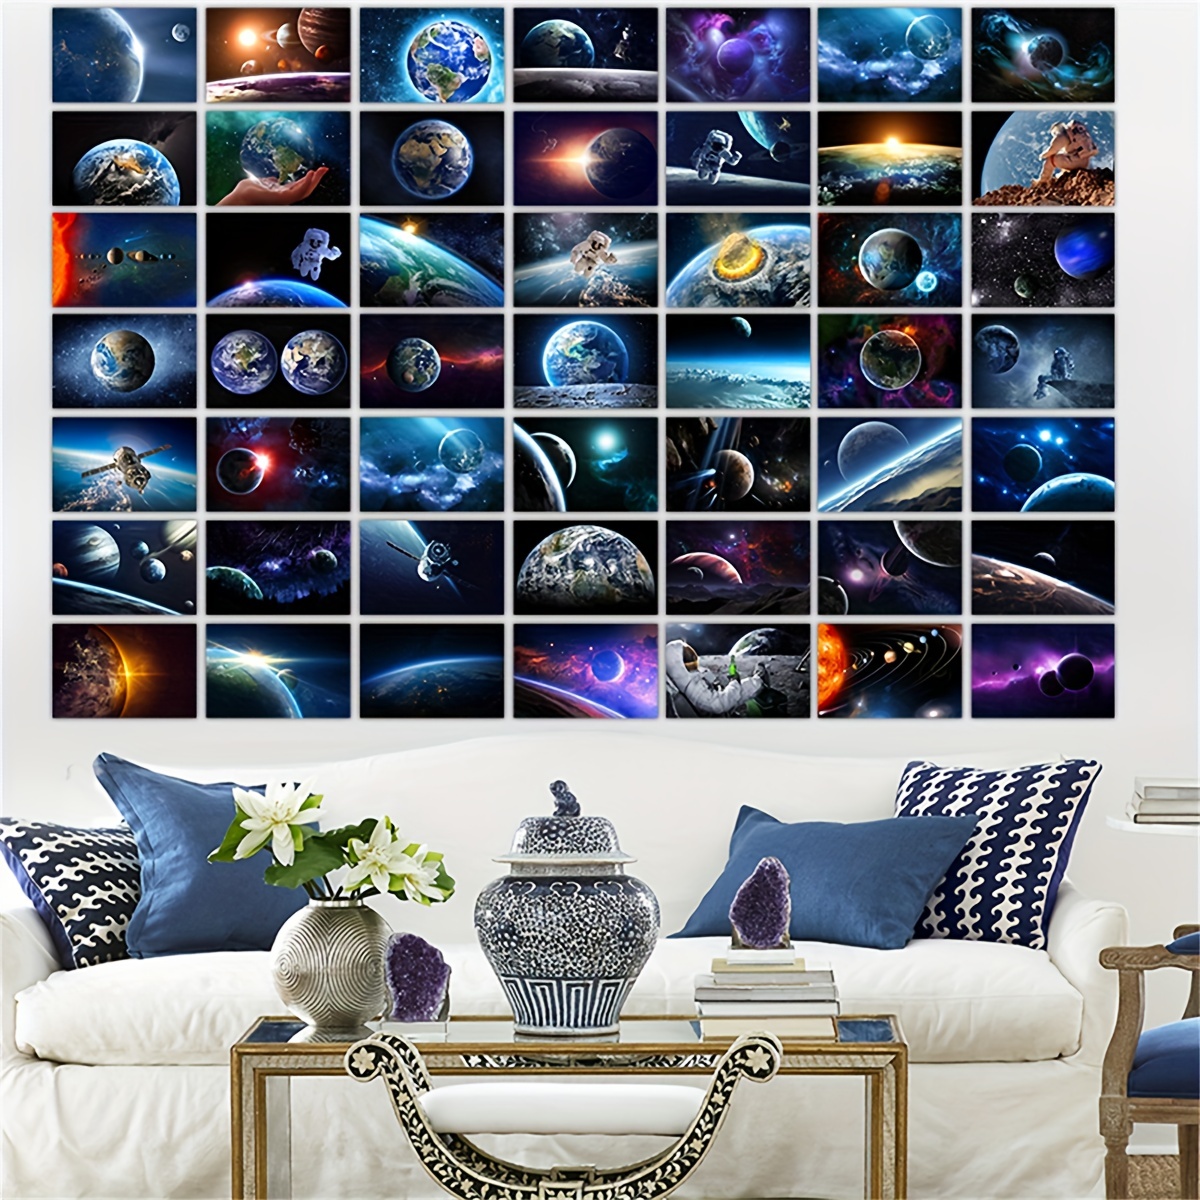 Indie Aesthetic Room Decor, Photo Wall Collage, Indie Room Decor